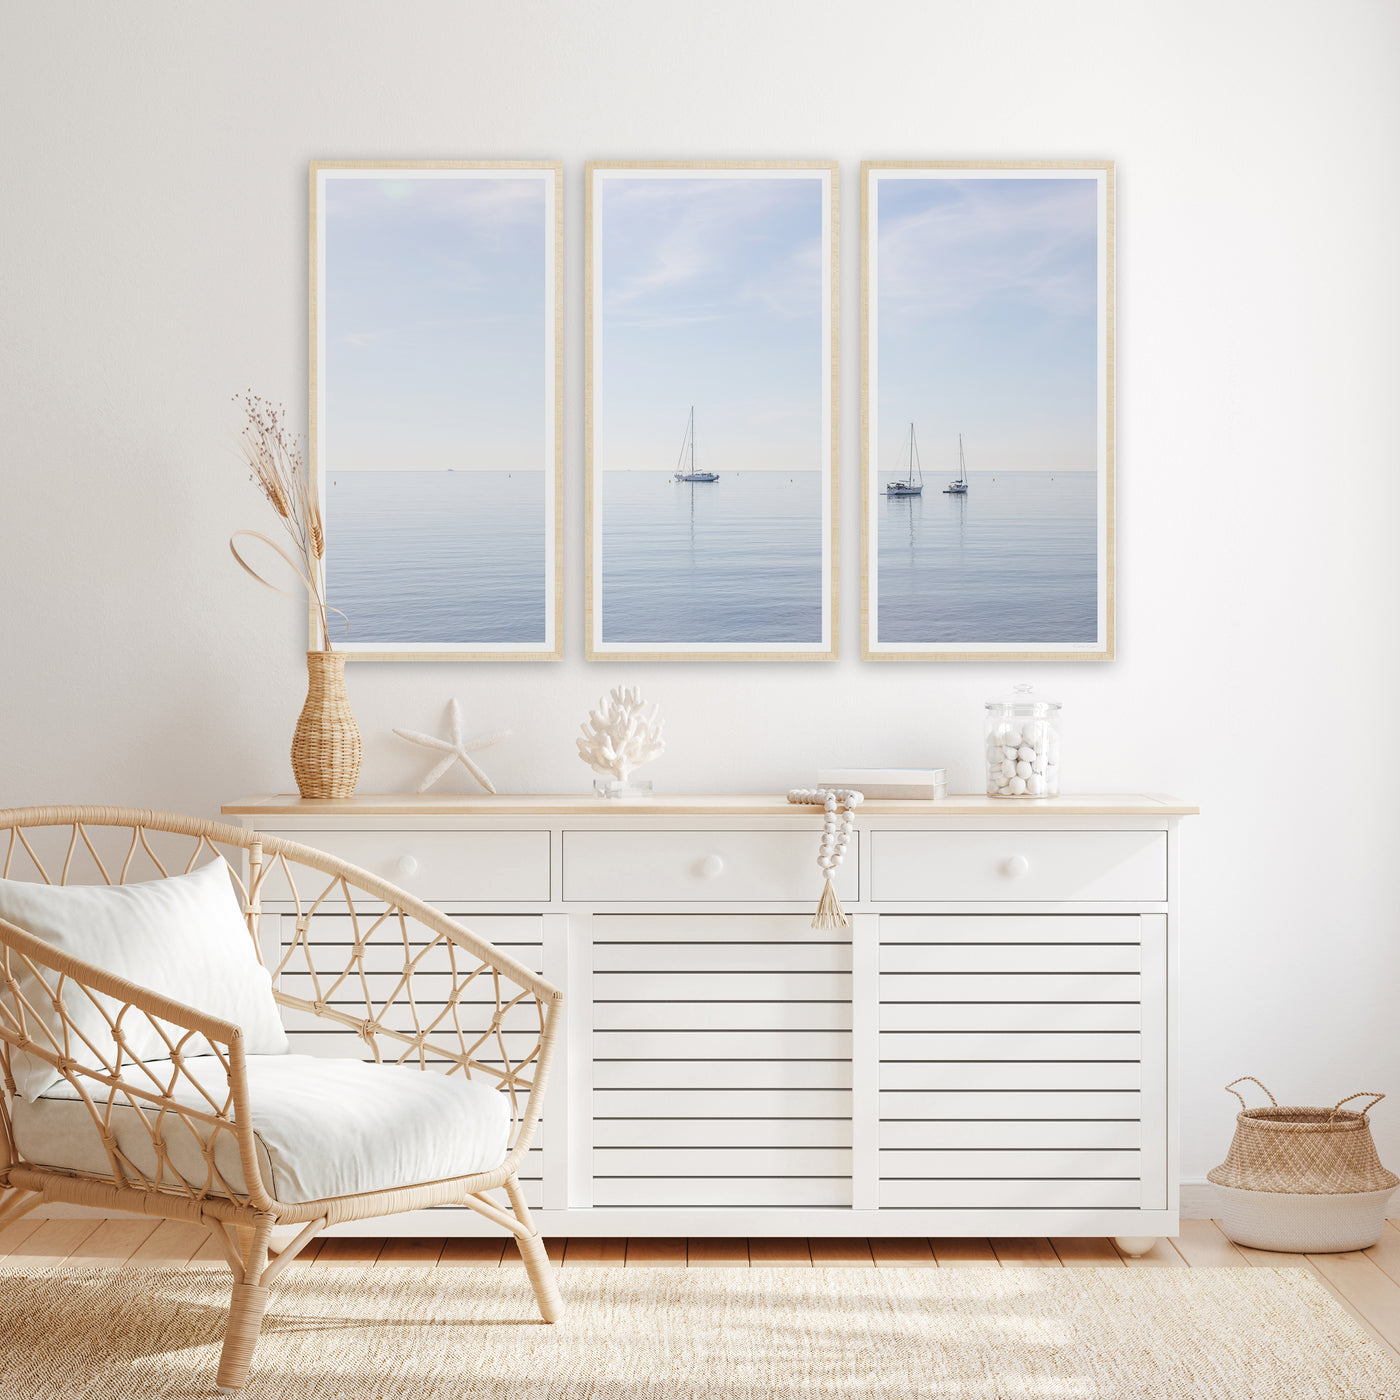 Boats No 6 - 3 piece art set by Cattie Coyle Photography above beach house dresser